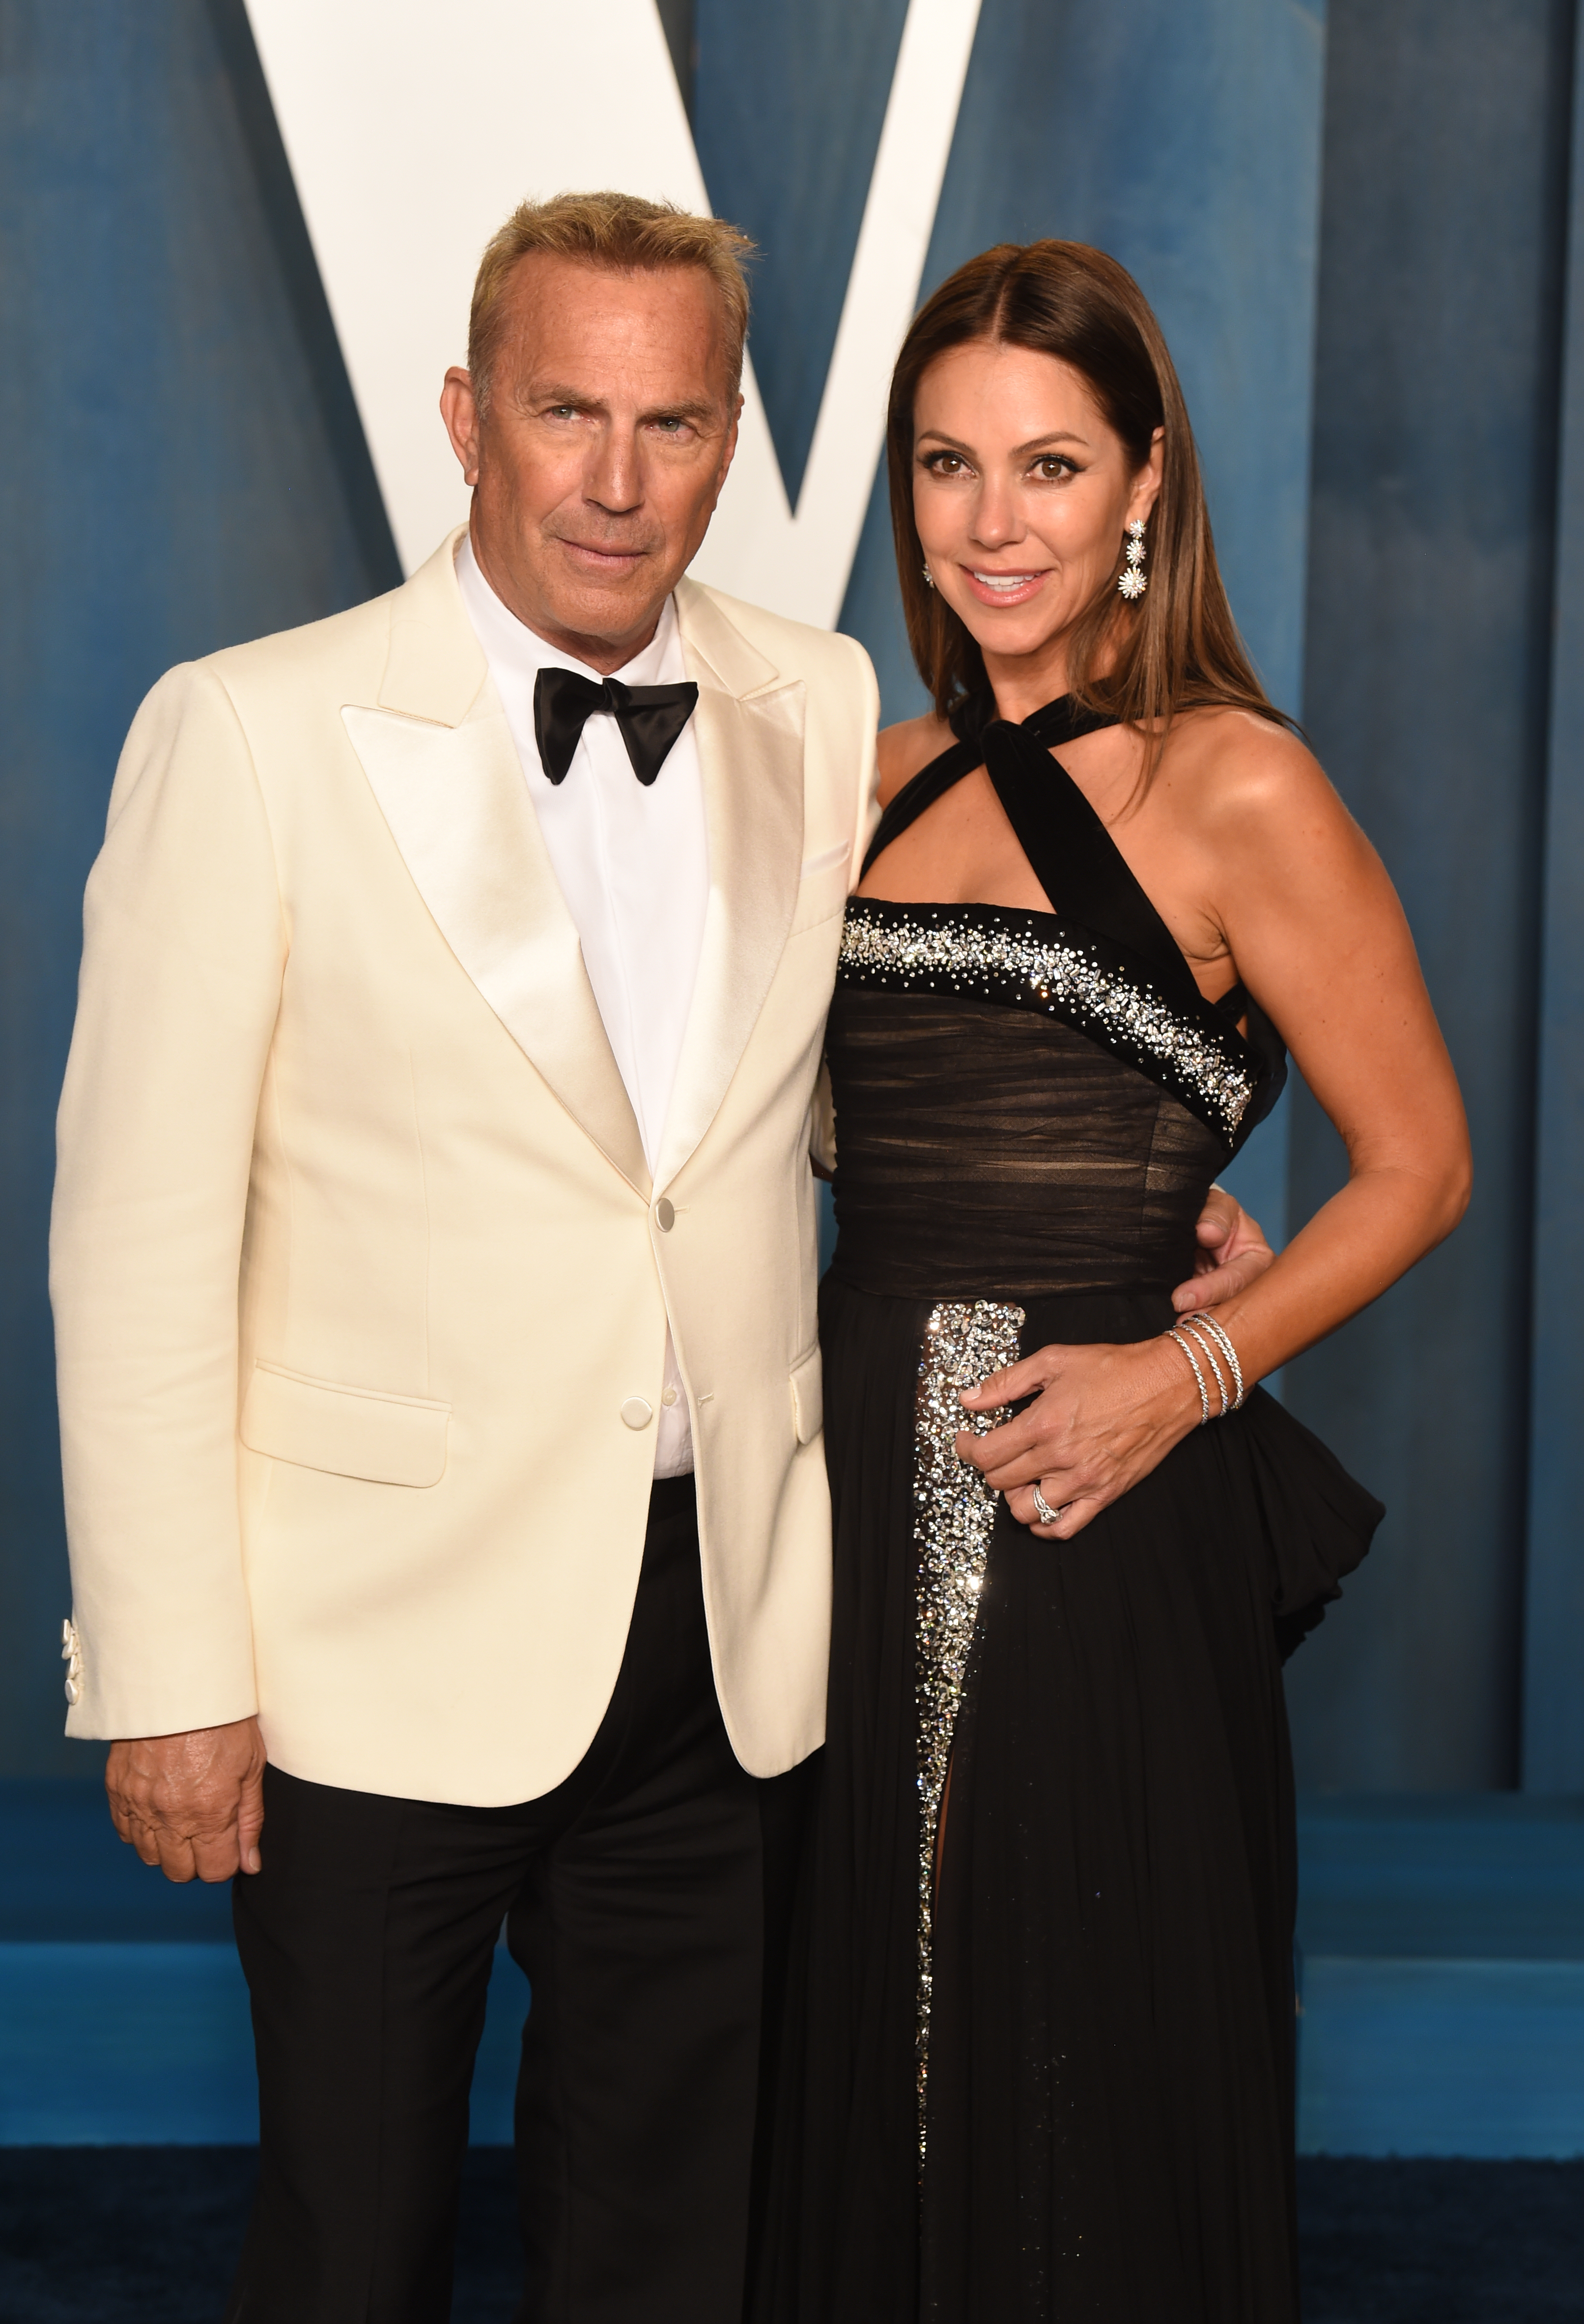 Kevin Costner and Christine Baumgartner at the Vanity Fair Oscar Party in Beverly Hills, Los Angeles, California, on March 27, 2022 | Source: Getty Images